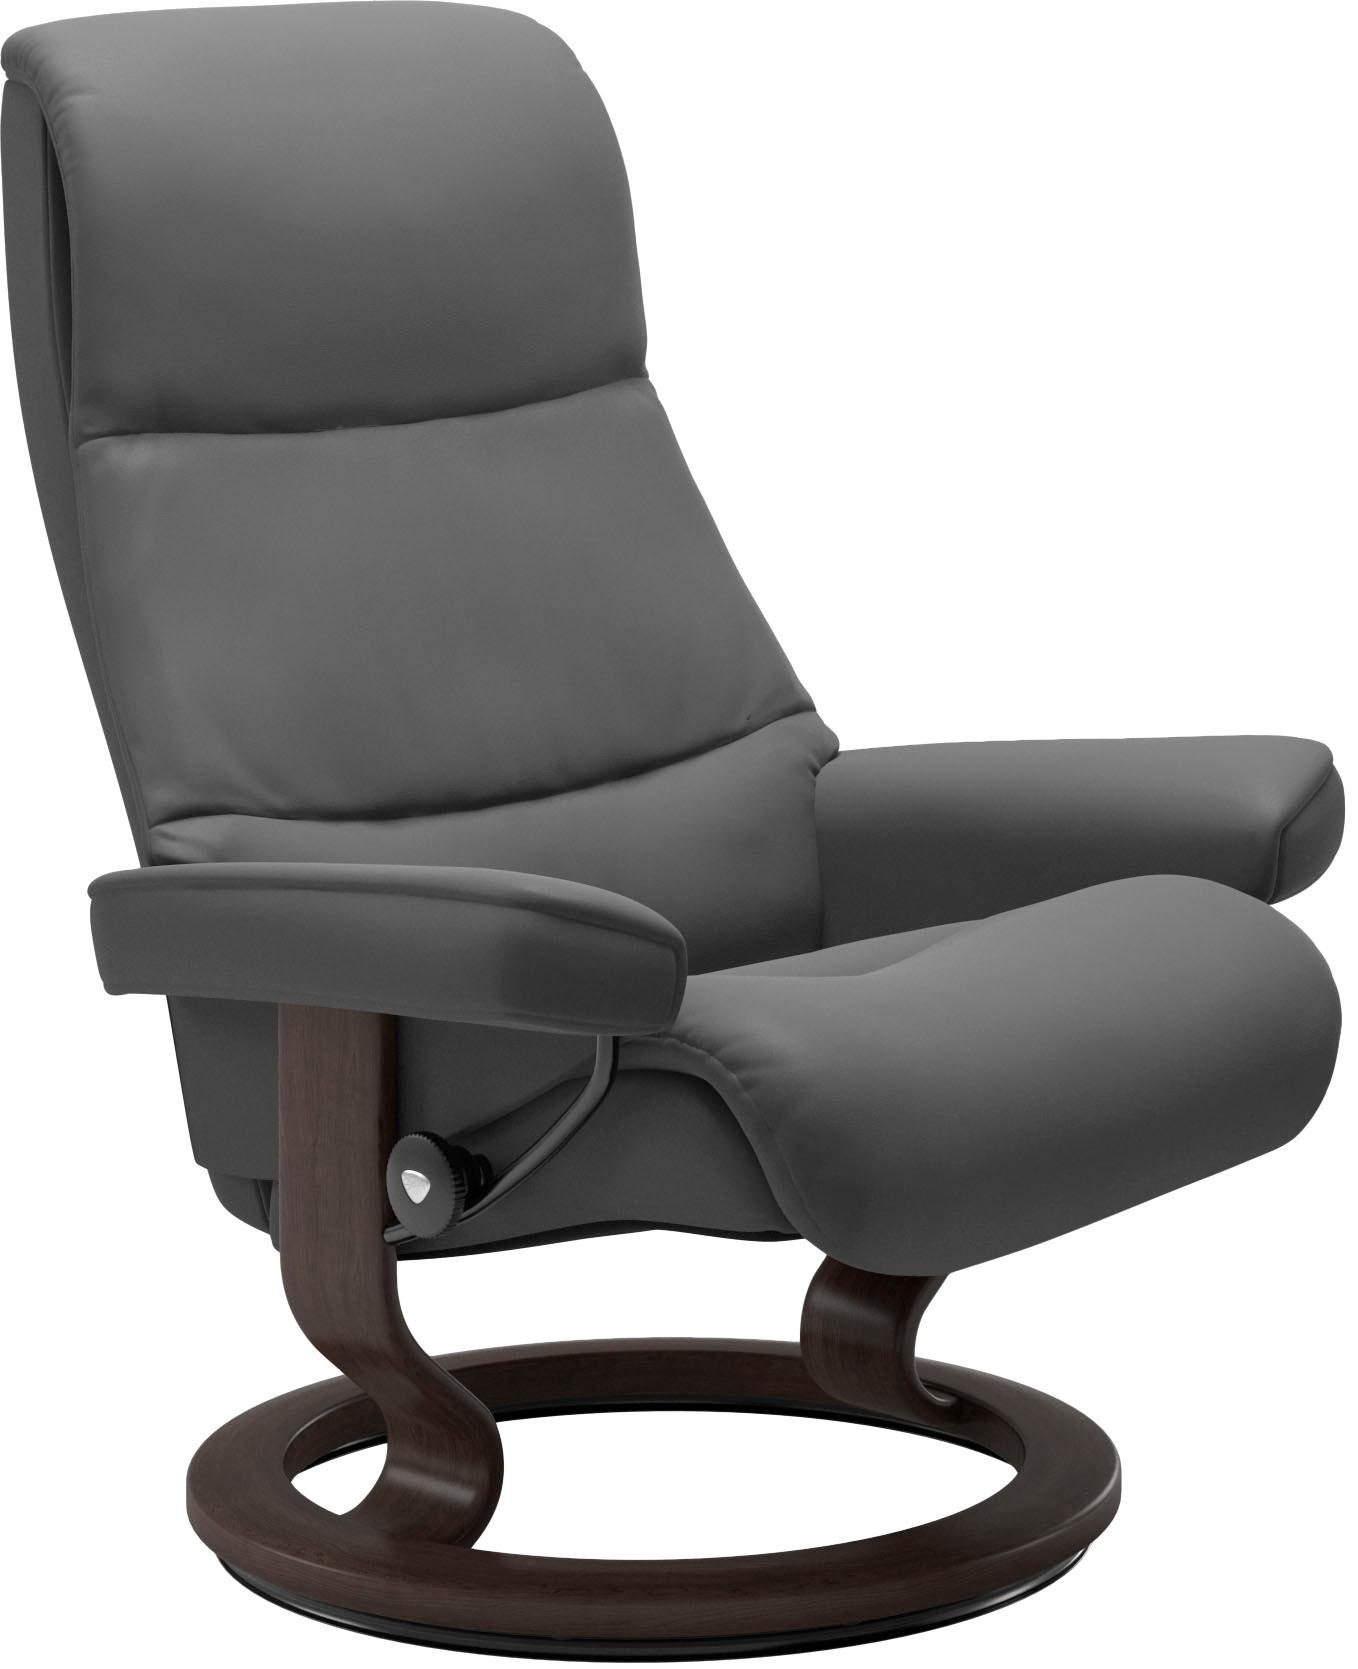 Stressless® Relaxsessel View, mit Classic Base, Größe S,Gestell Wenge | Funktionssessel